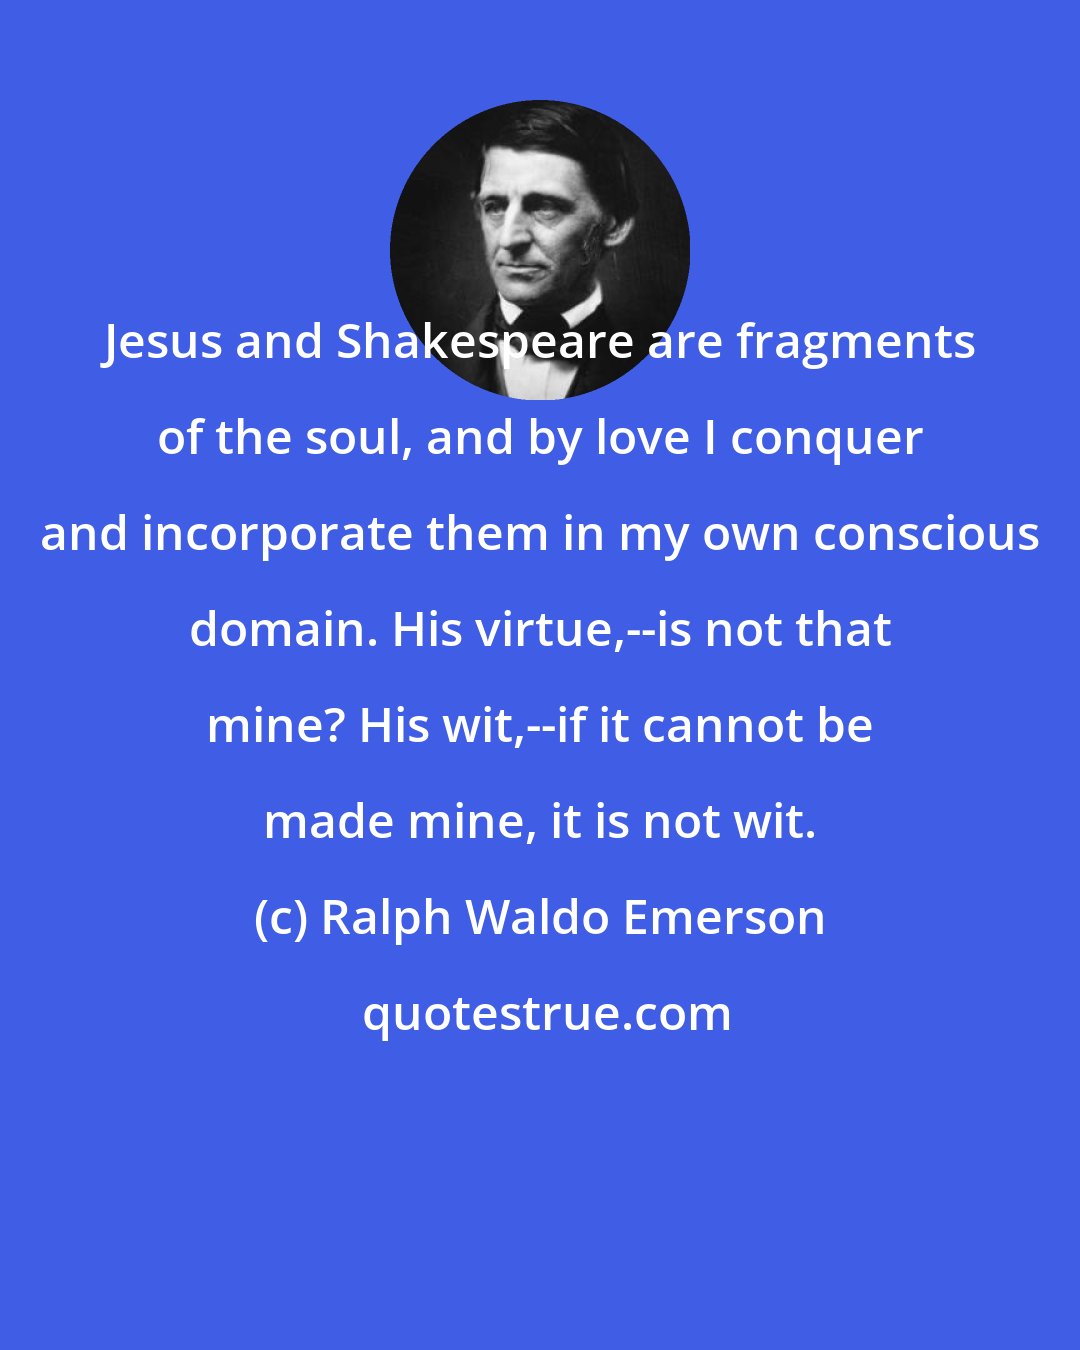 Ralph Waldo Emerson: Jesus and Shakespeare are fragments of the soul, and by love I conquer and incorporate them in my own conscious domain. His virtue,--is not that mine? His wit,--if it cannot be made mine, it is not wit.